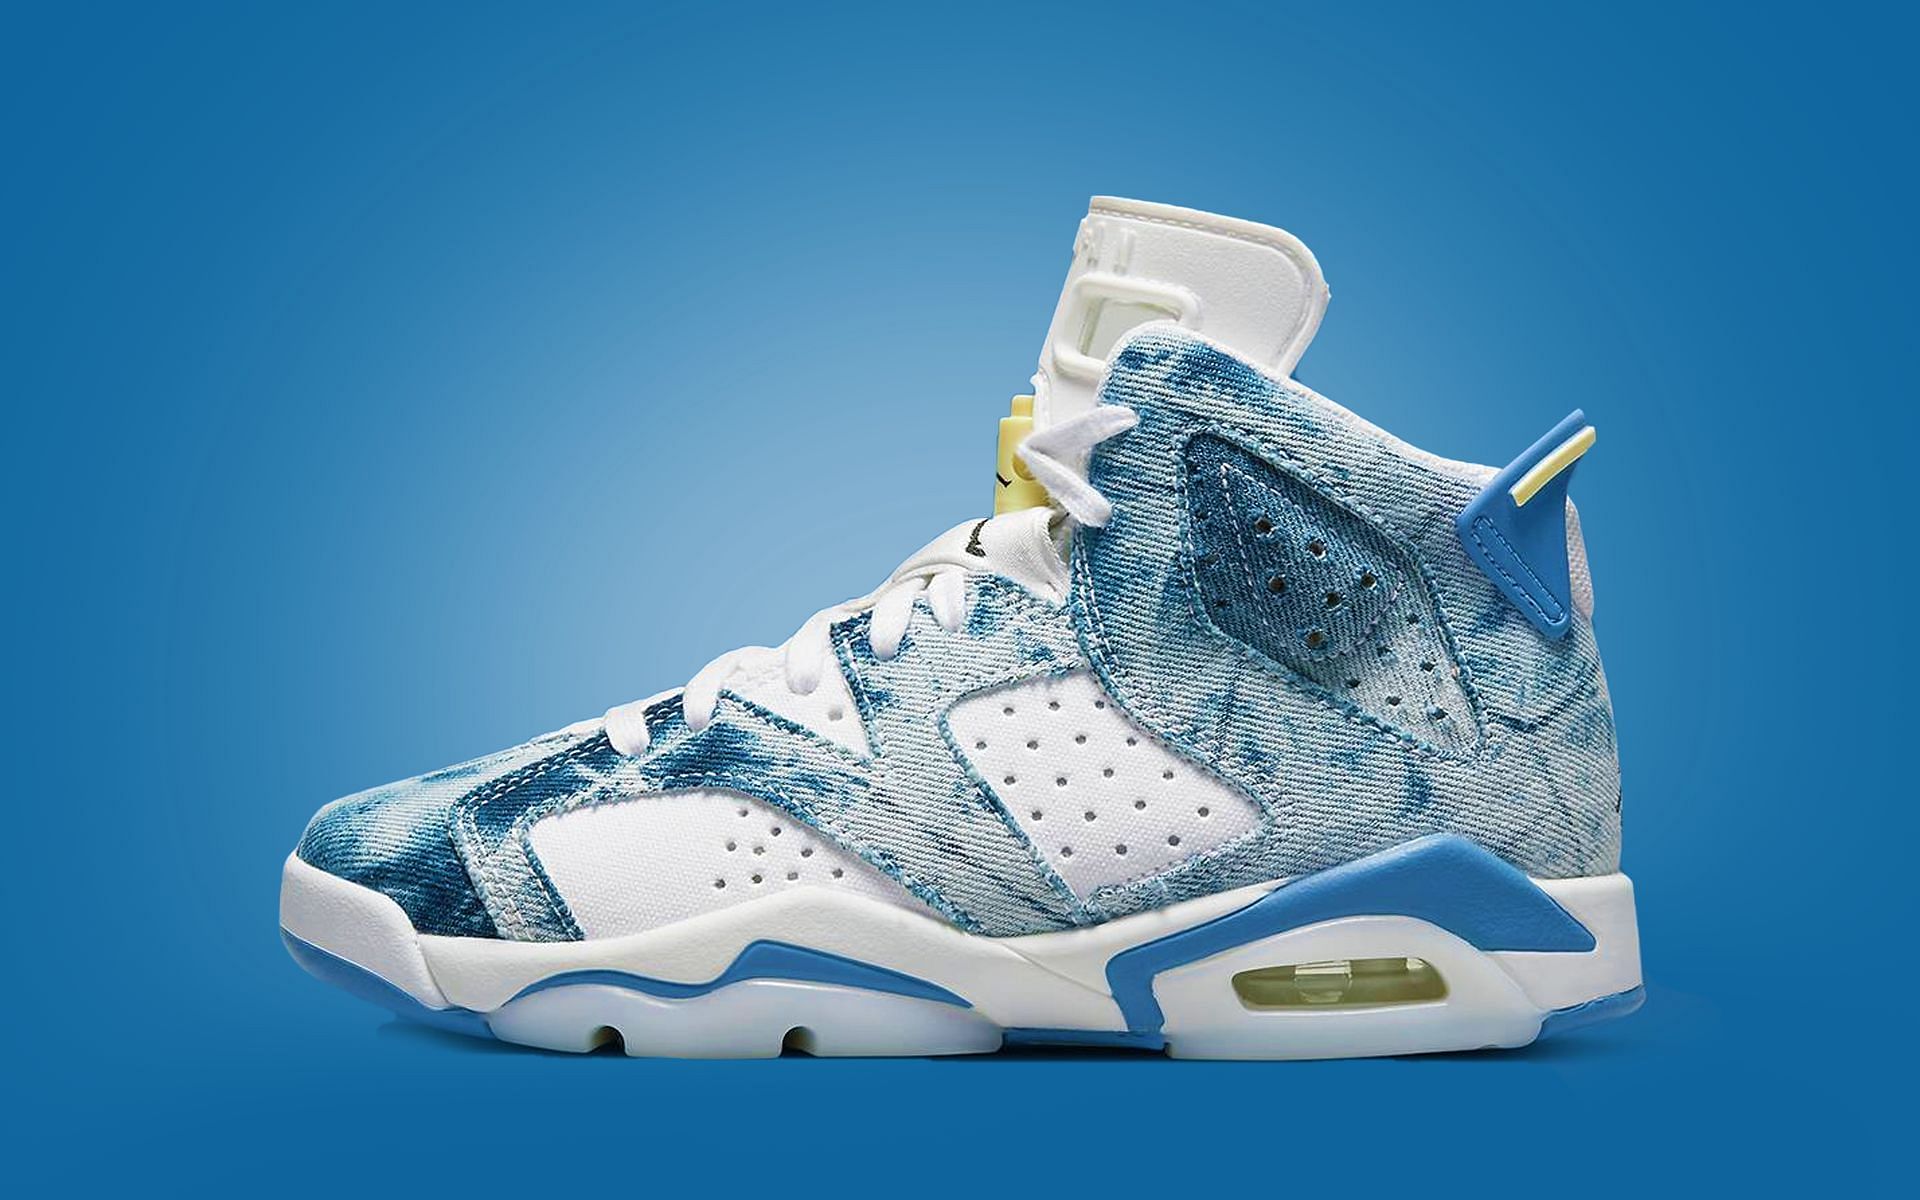 Air Jordan 6 Washed Denim: Release date, where to buy, price and